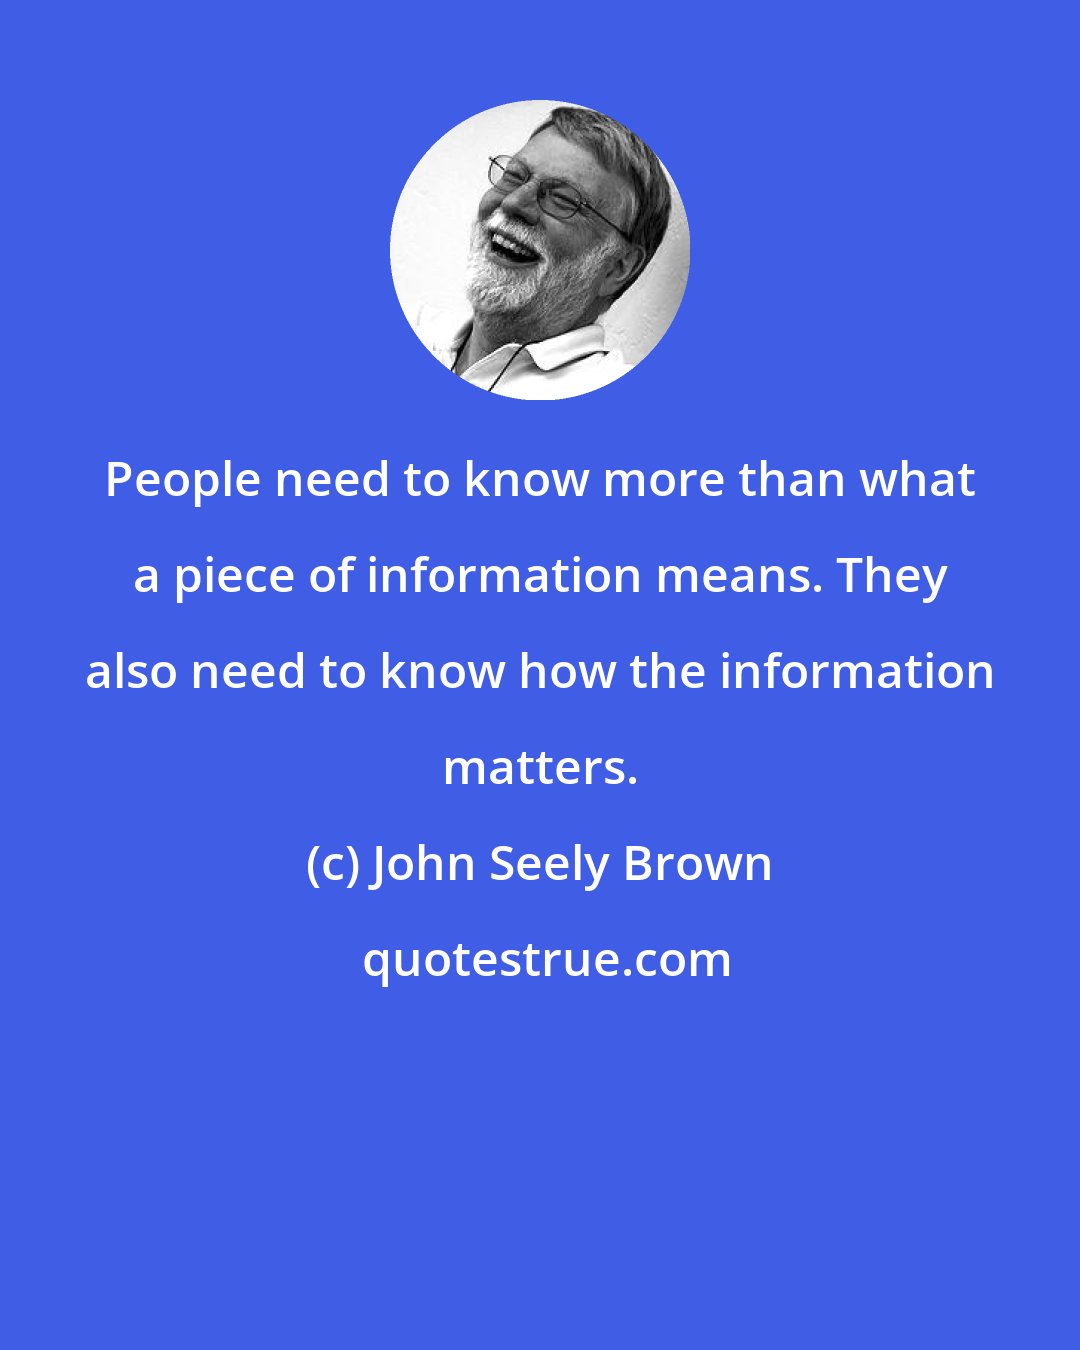 John Seely Brown: People need to know more than what a piece of information means. They also need to know how the information matters.